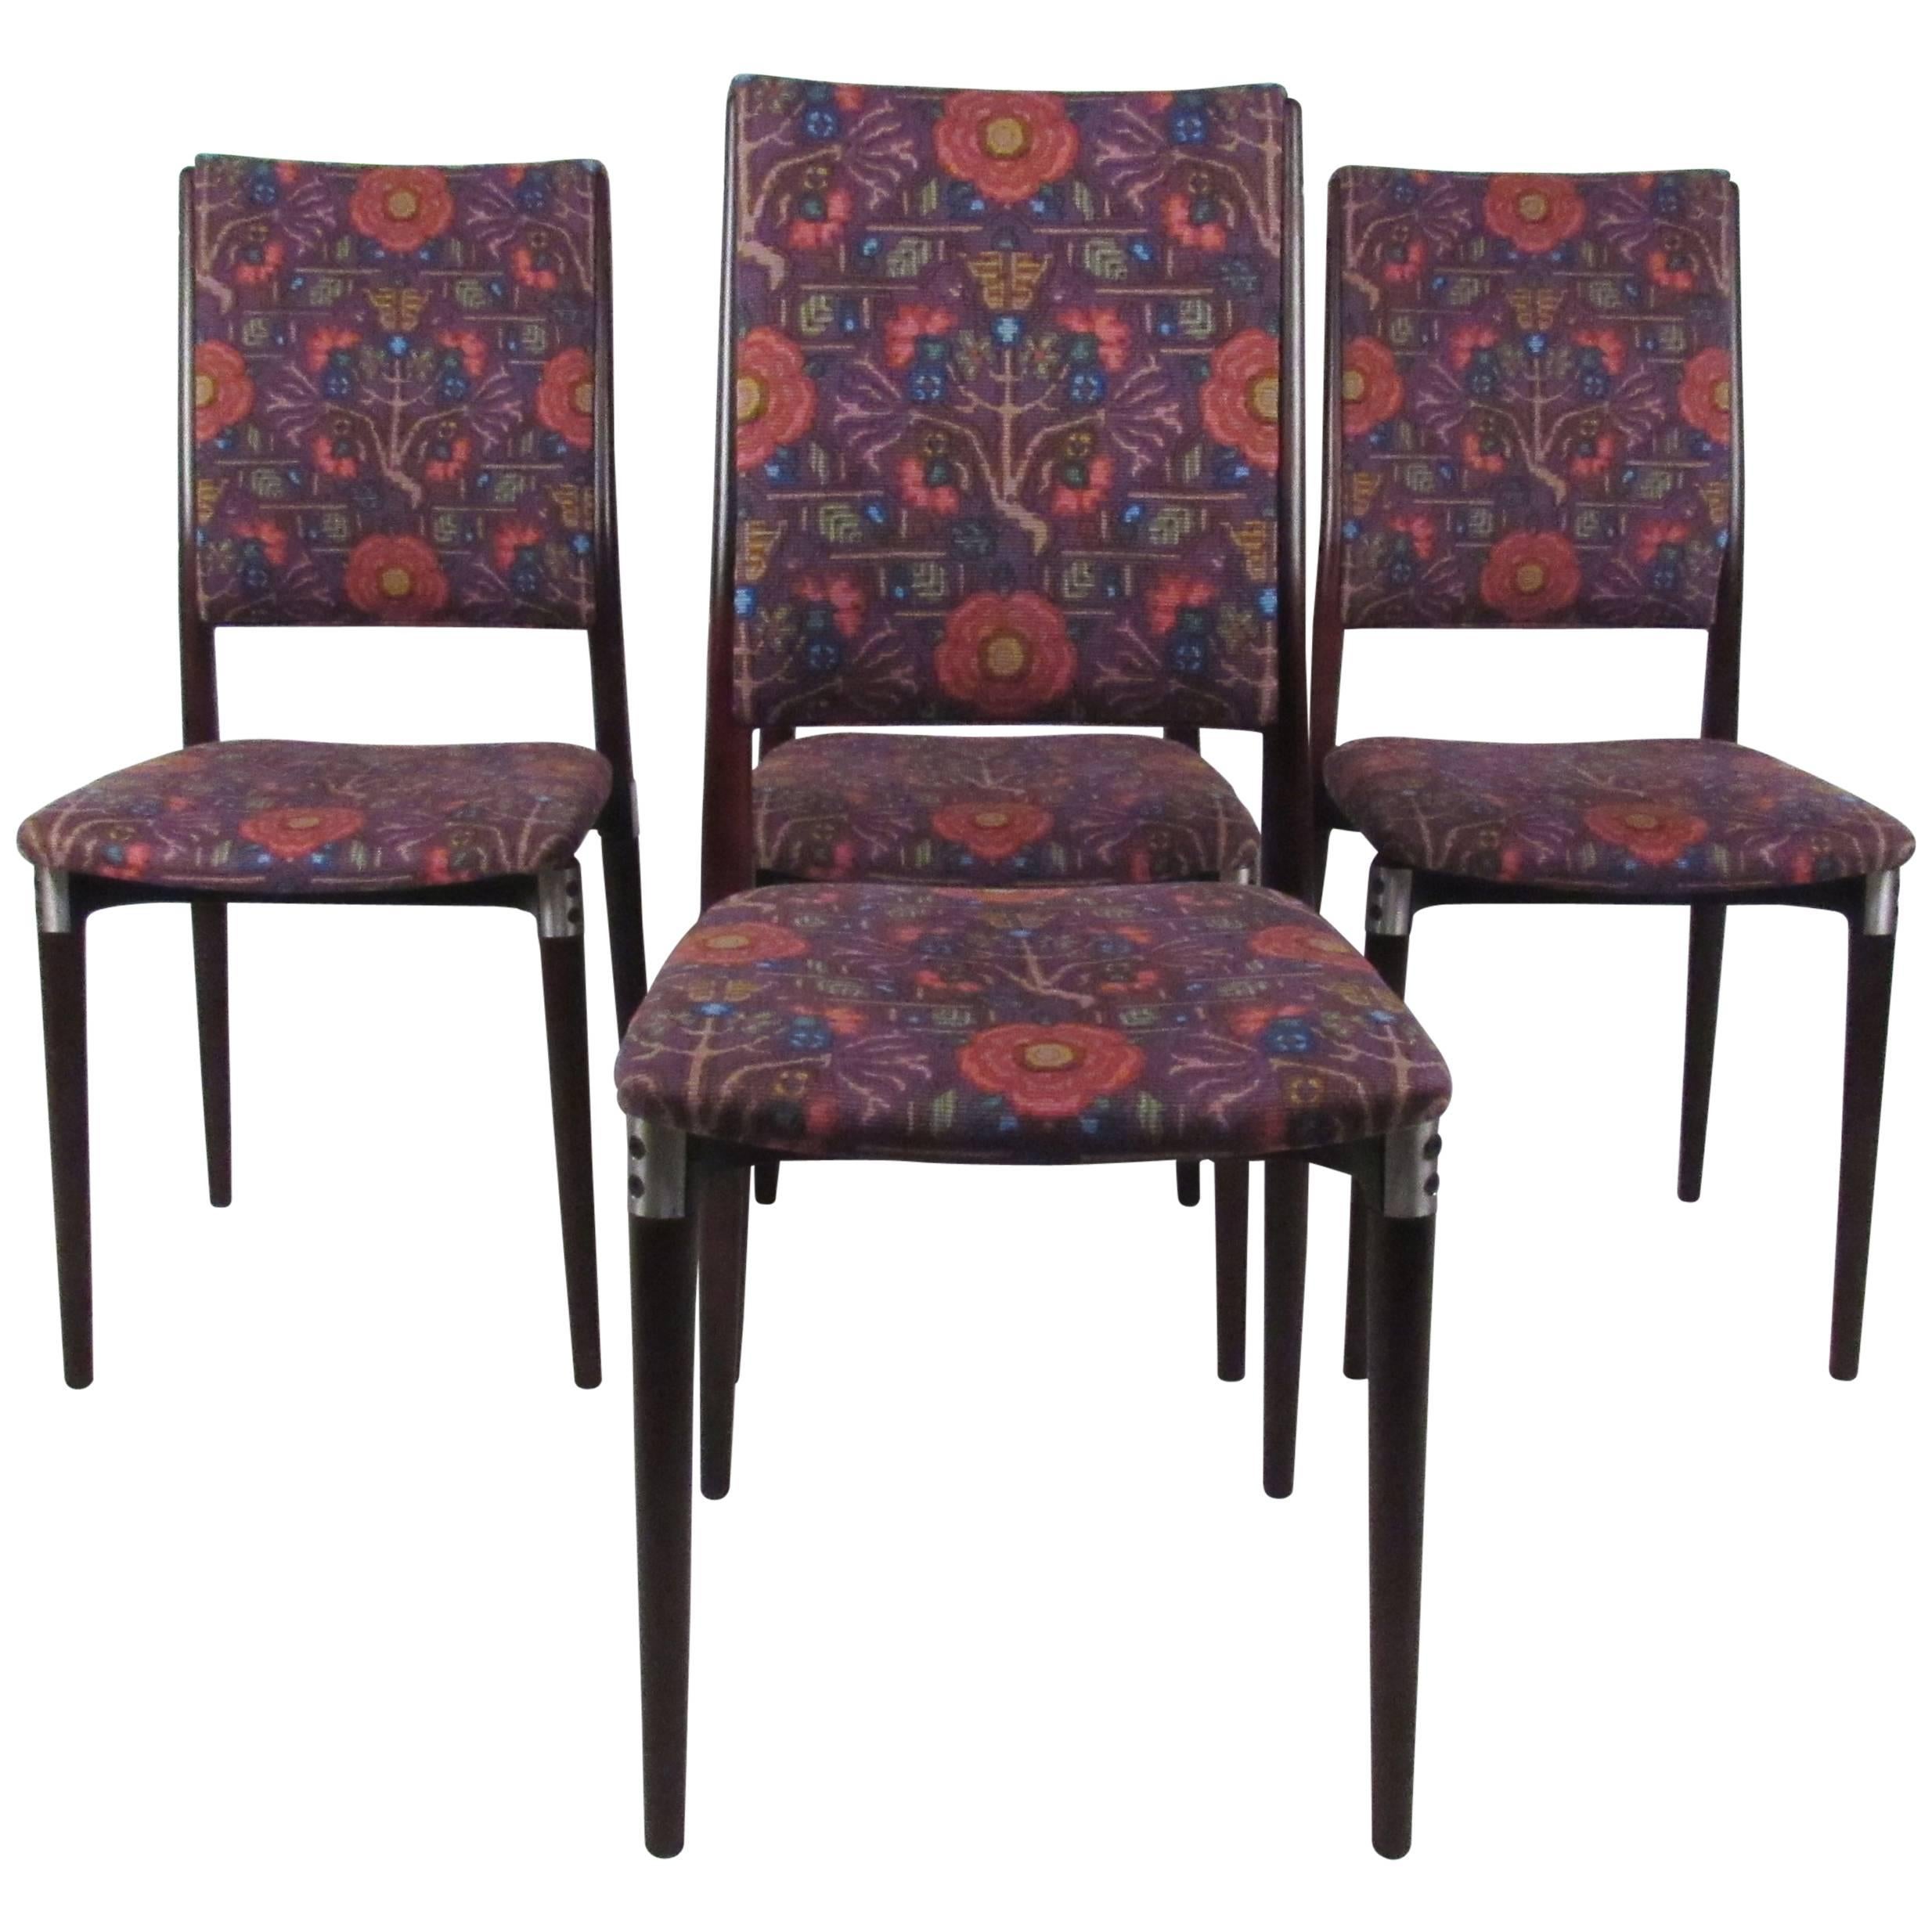 Exquisite Set of Mid-Century Italian Dining Chairs by Eugenio Gerli